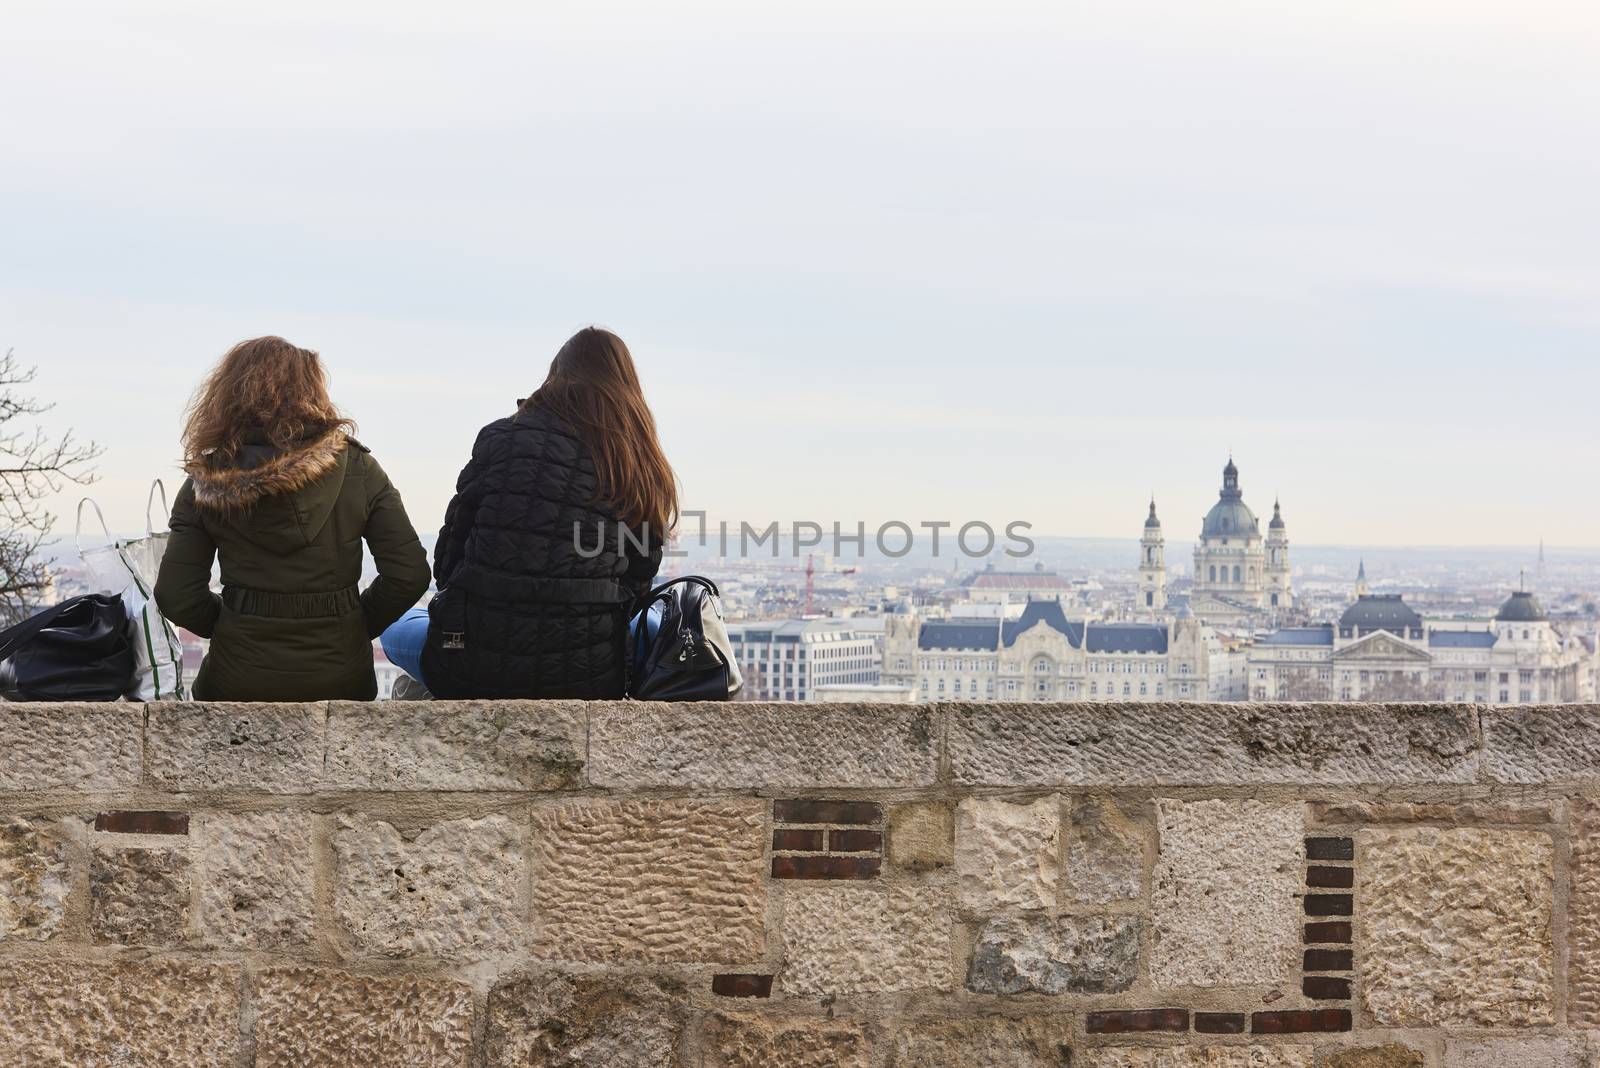 BUDAPEST, HUNGARY - FEBRUARY 02: Two girls sitting on wall enjoying the view from Buda Castle, with Gresham Palace and Saint Stephen's Basilica in the background. February 02, 2016 in Budapest.